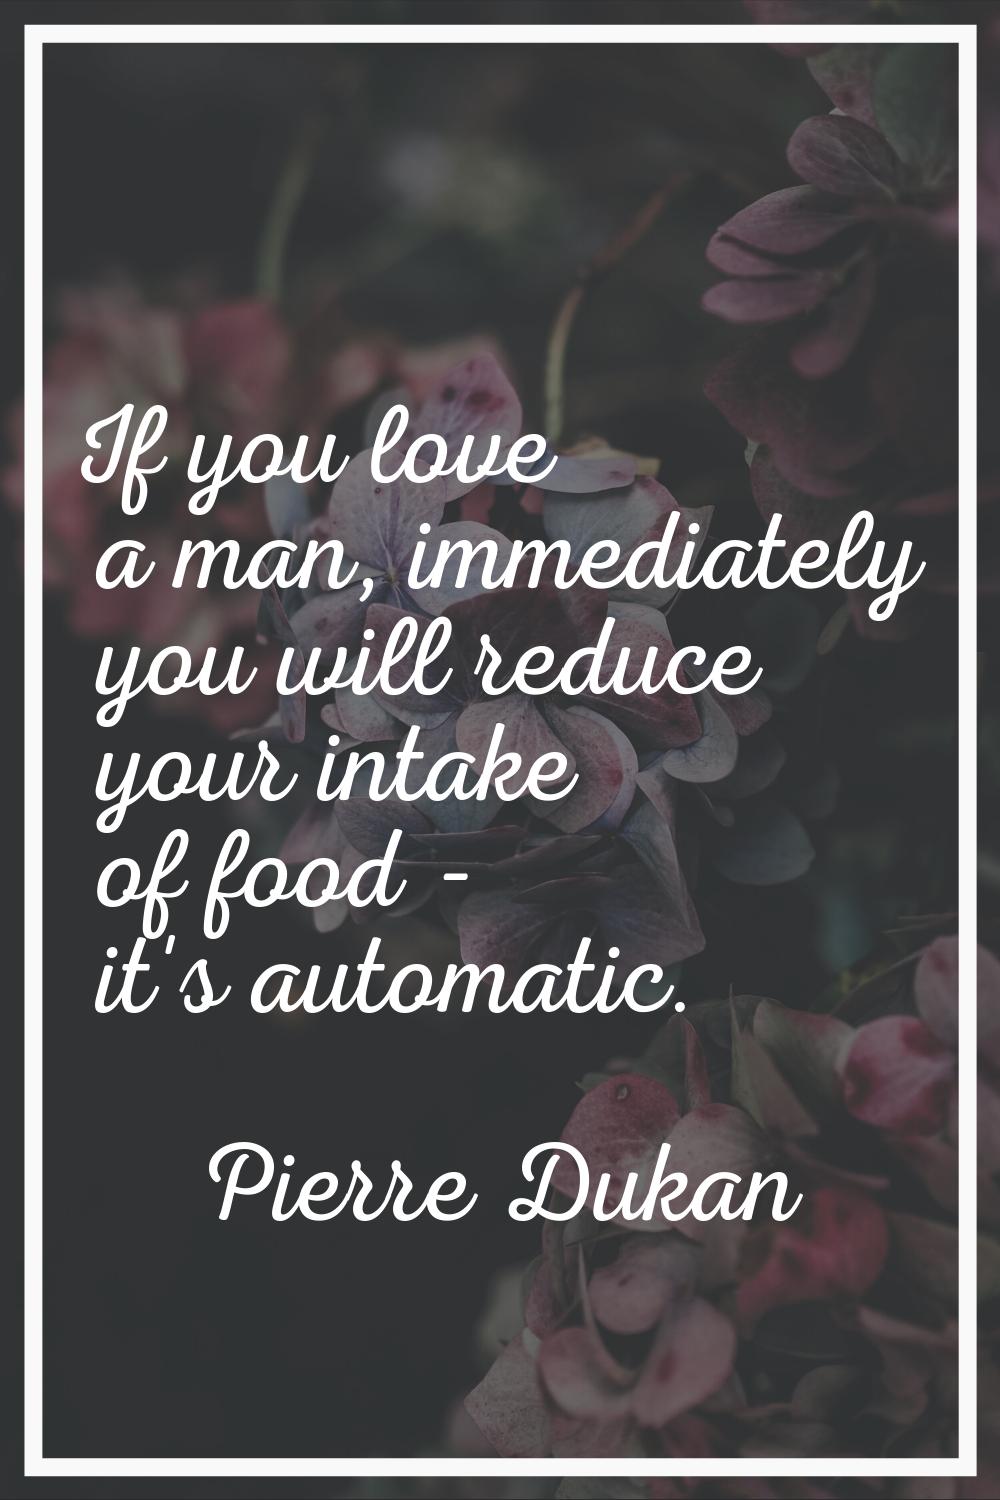 If you love a man, immediately you will reduce your intake of food - it's automatic.